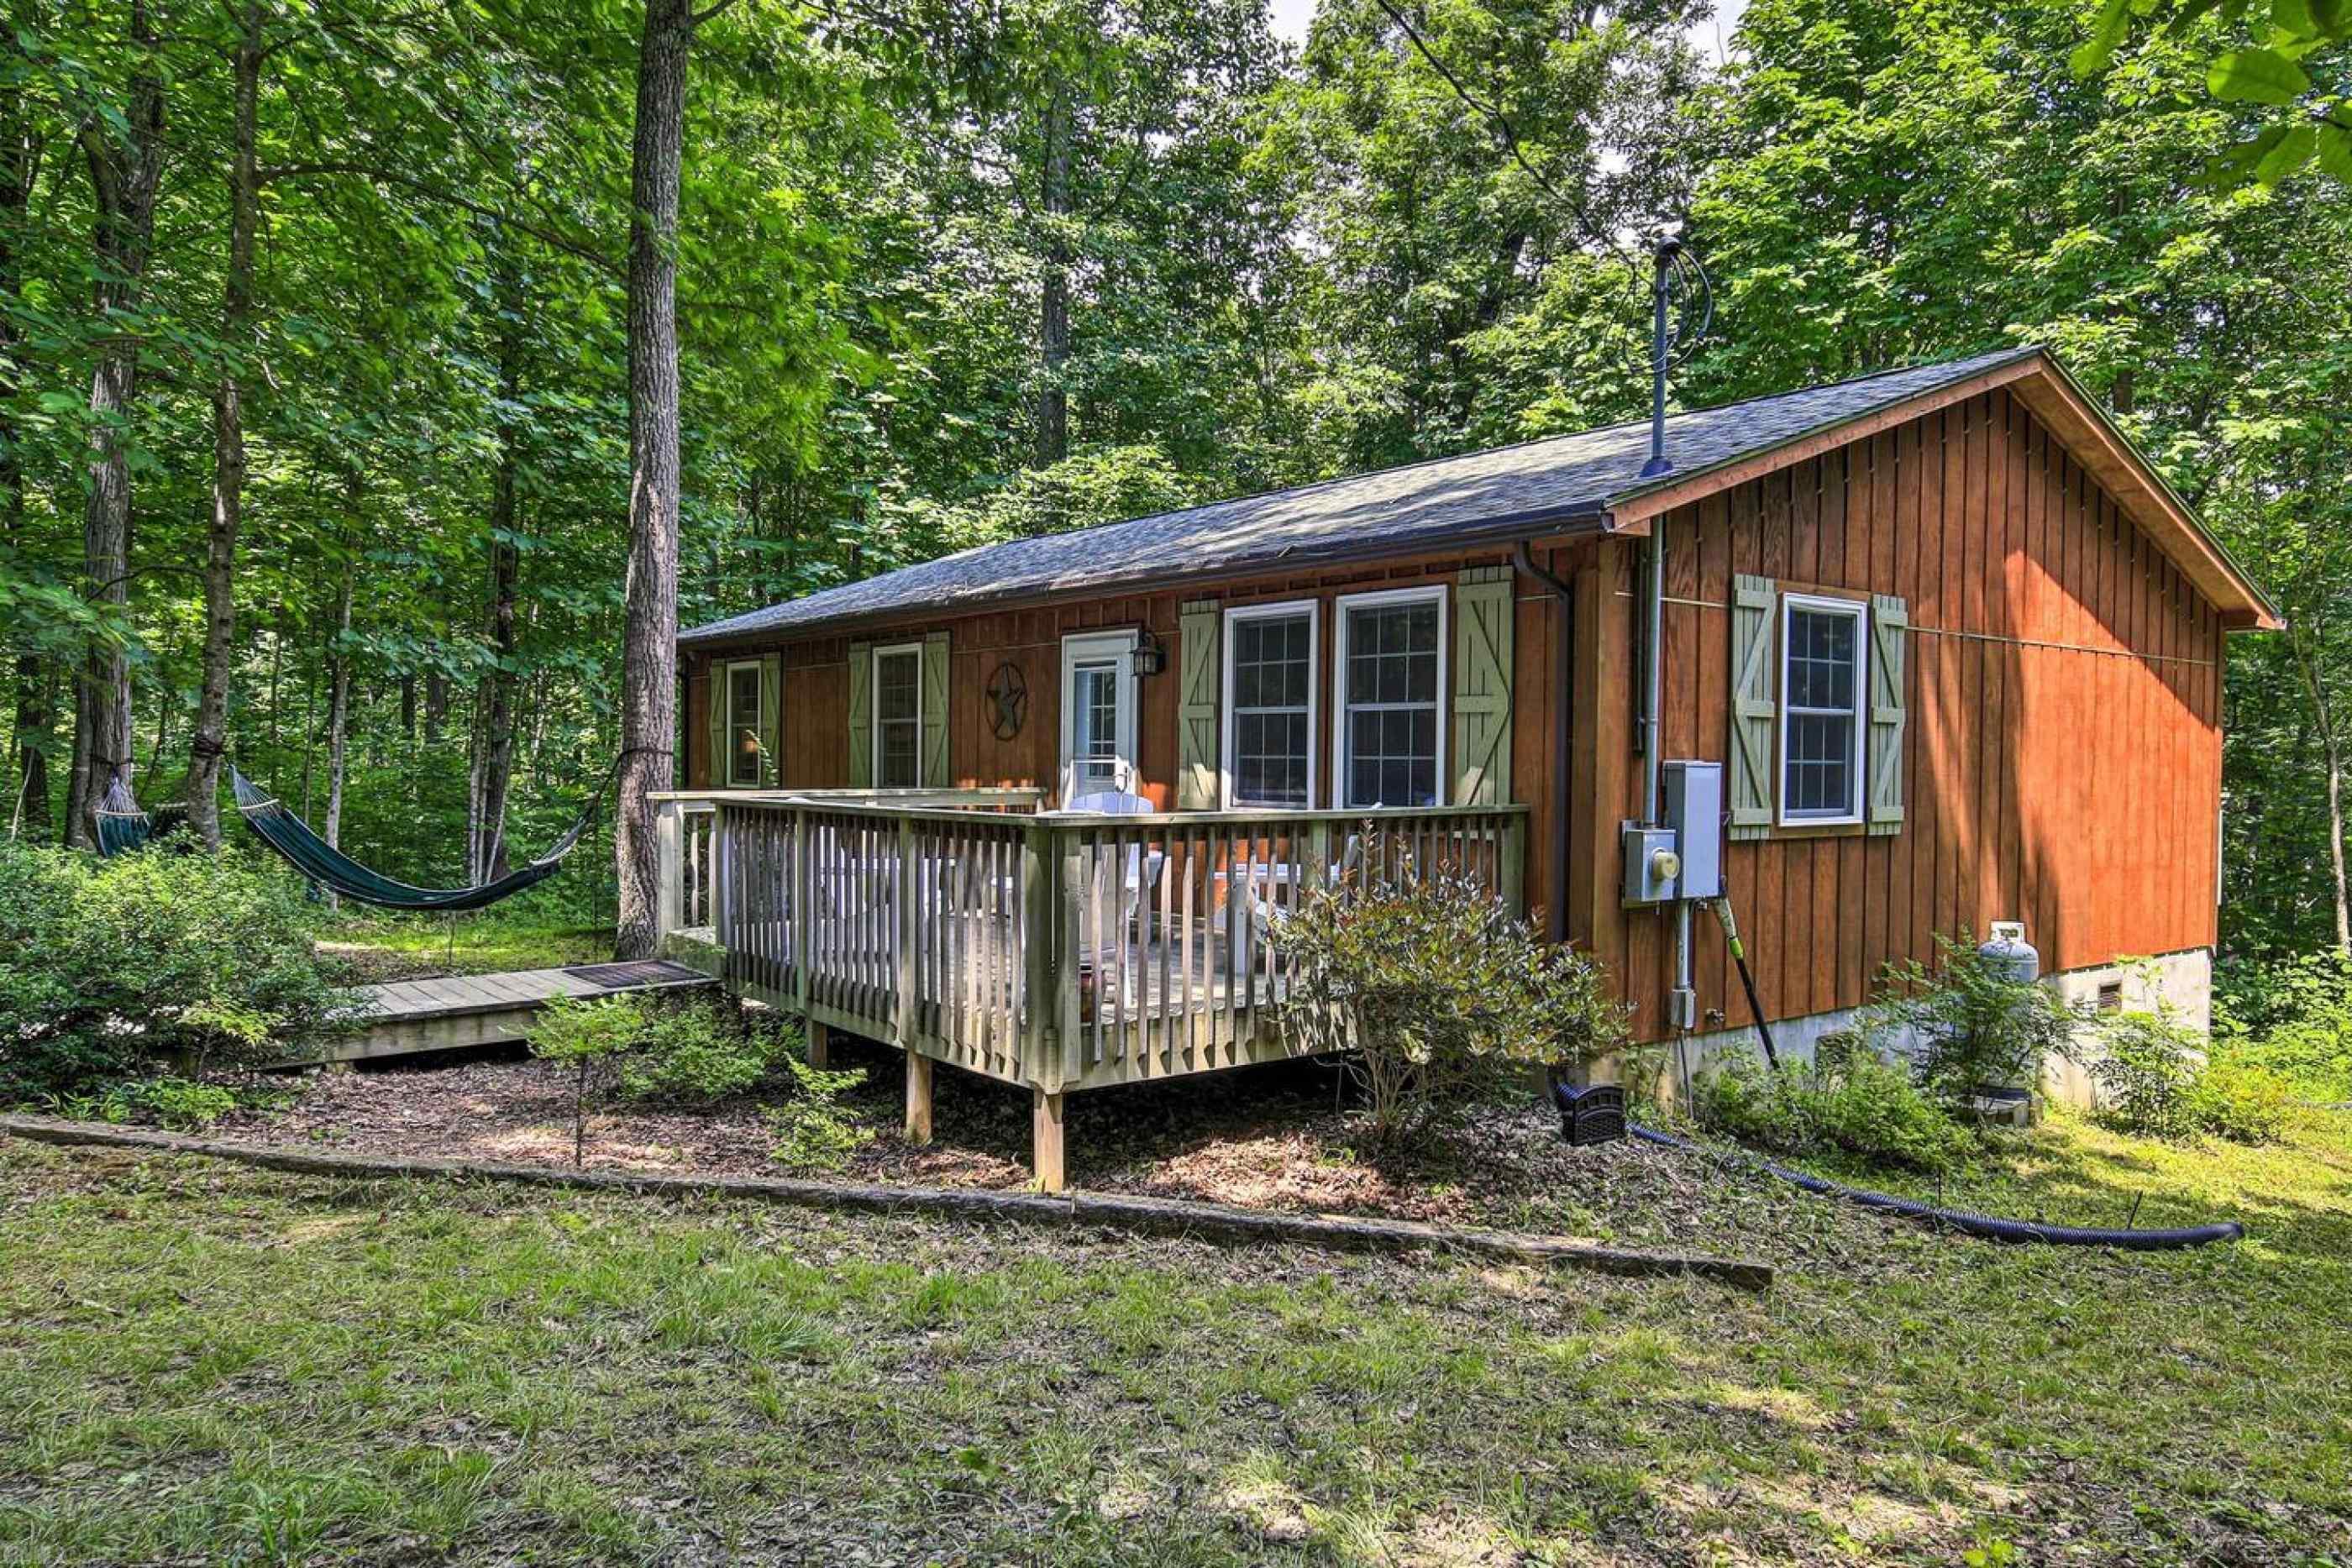 Beautiful mountain retreat located on a dead end road just minutes from the Blue Ridge Parkway.  Enjoy your privacy surrounded by woods and rhododendron with no other dwelling in sight.  The home is move-in-ready and is fully furnished.  Enjoy the morning sunrise on the back deck and use the fire pit to roast marsh mellows in the evening in the company of the Love Bears!